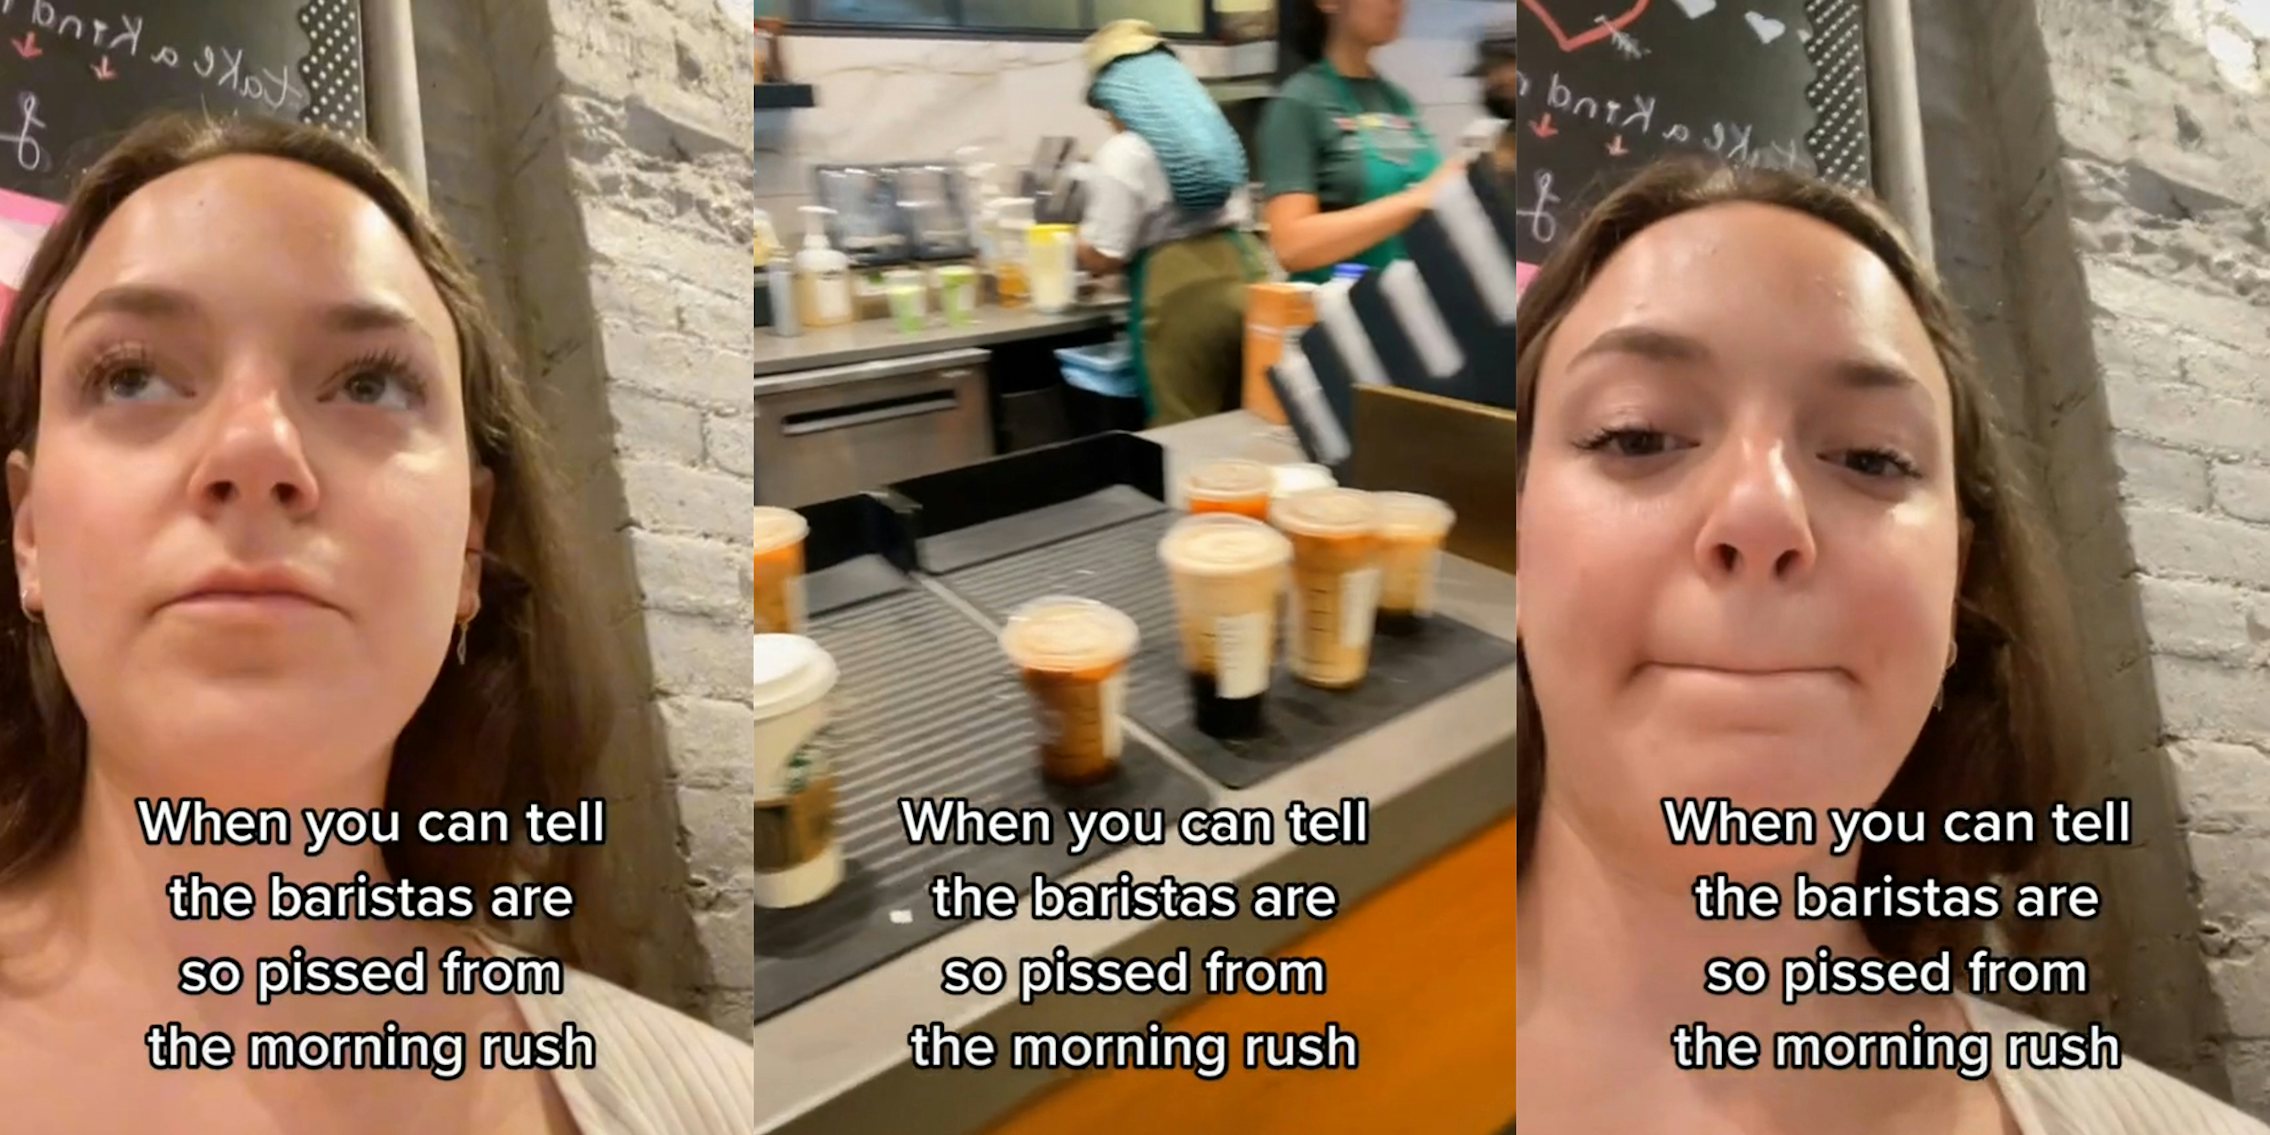 young woman in starbucks (l&r) drinks on counter (c) all with caption 'When you can tell the baristas are so pissed from the morning rush'